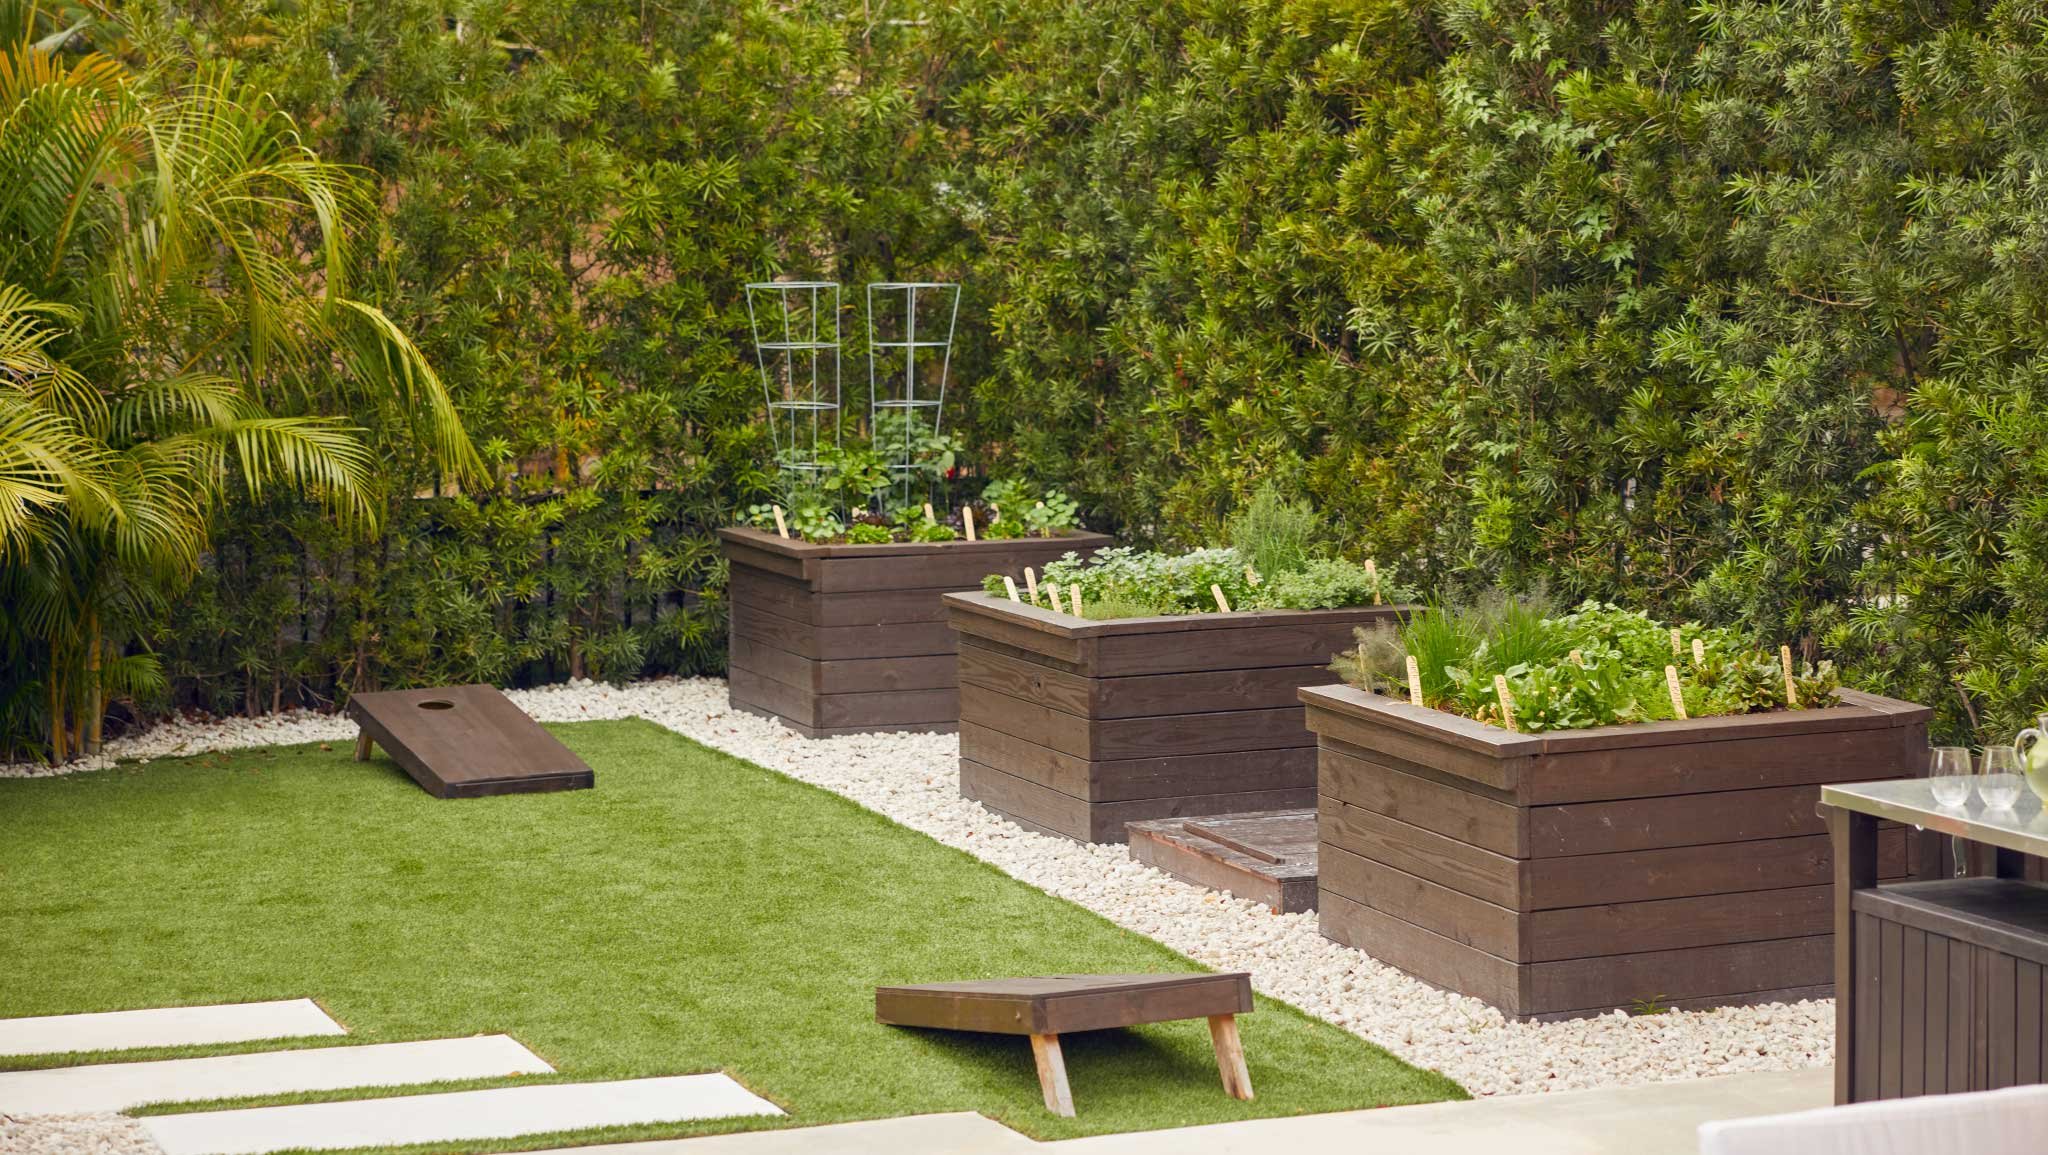 backyard corner with cornhole on lawn and raised bed garden